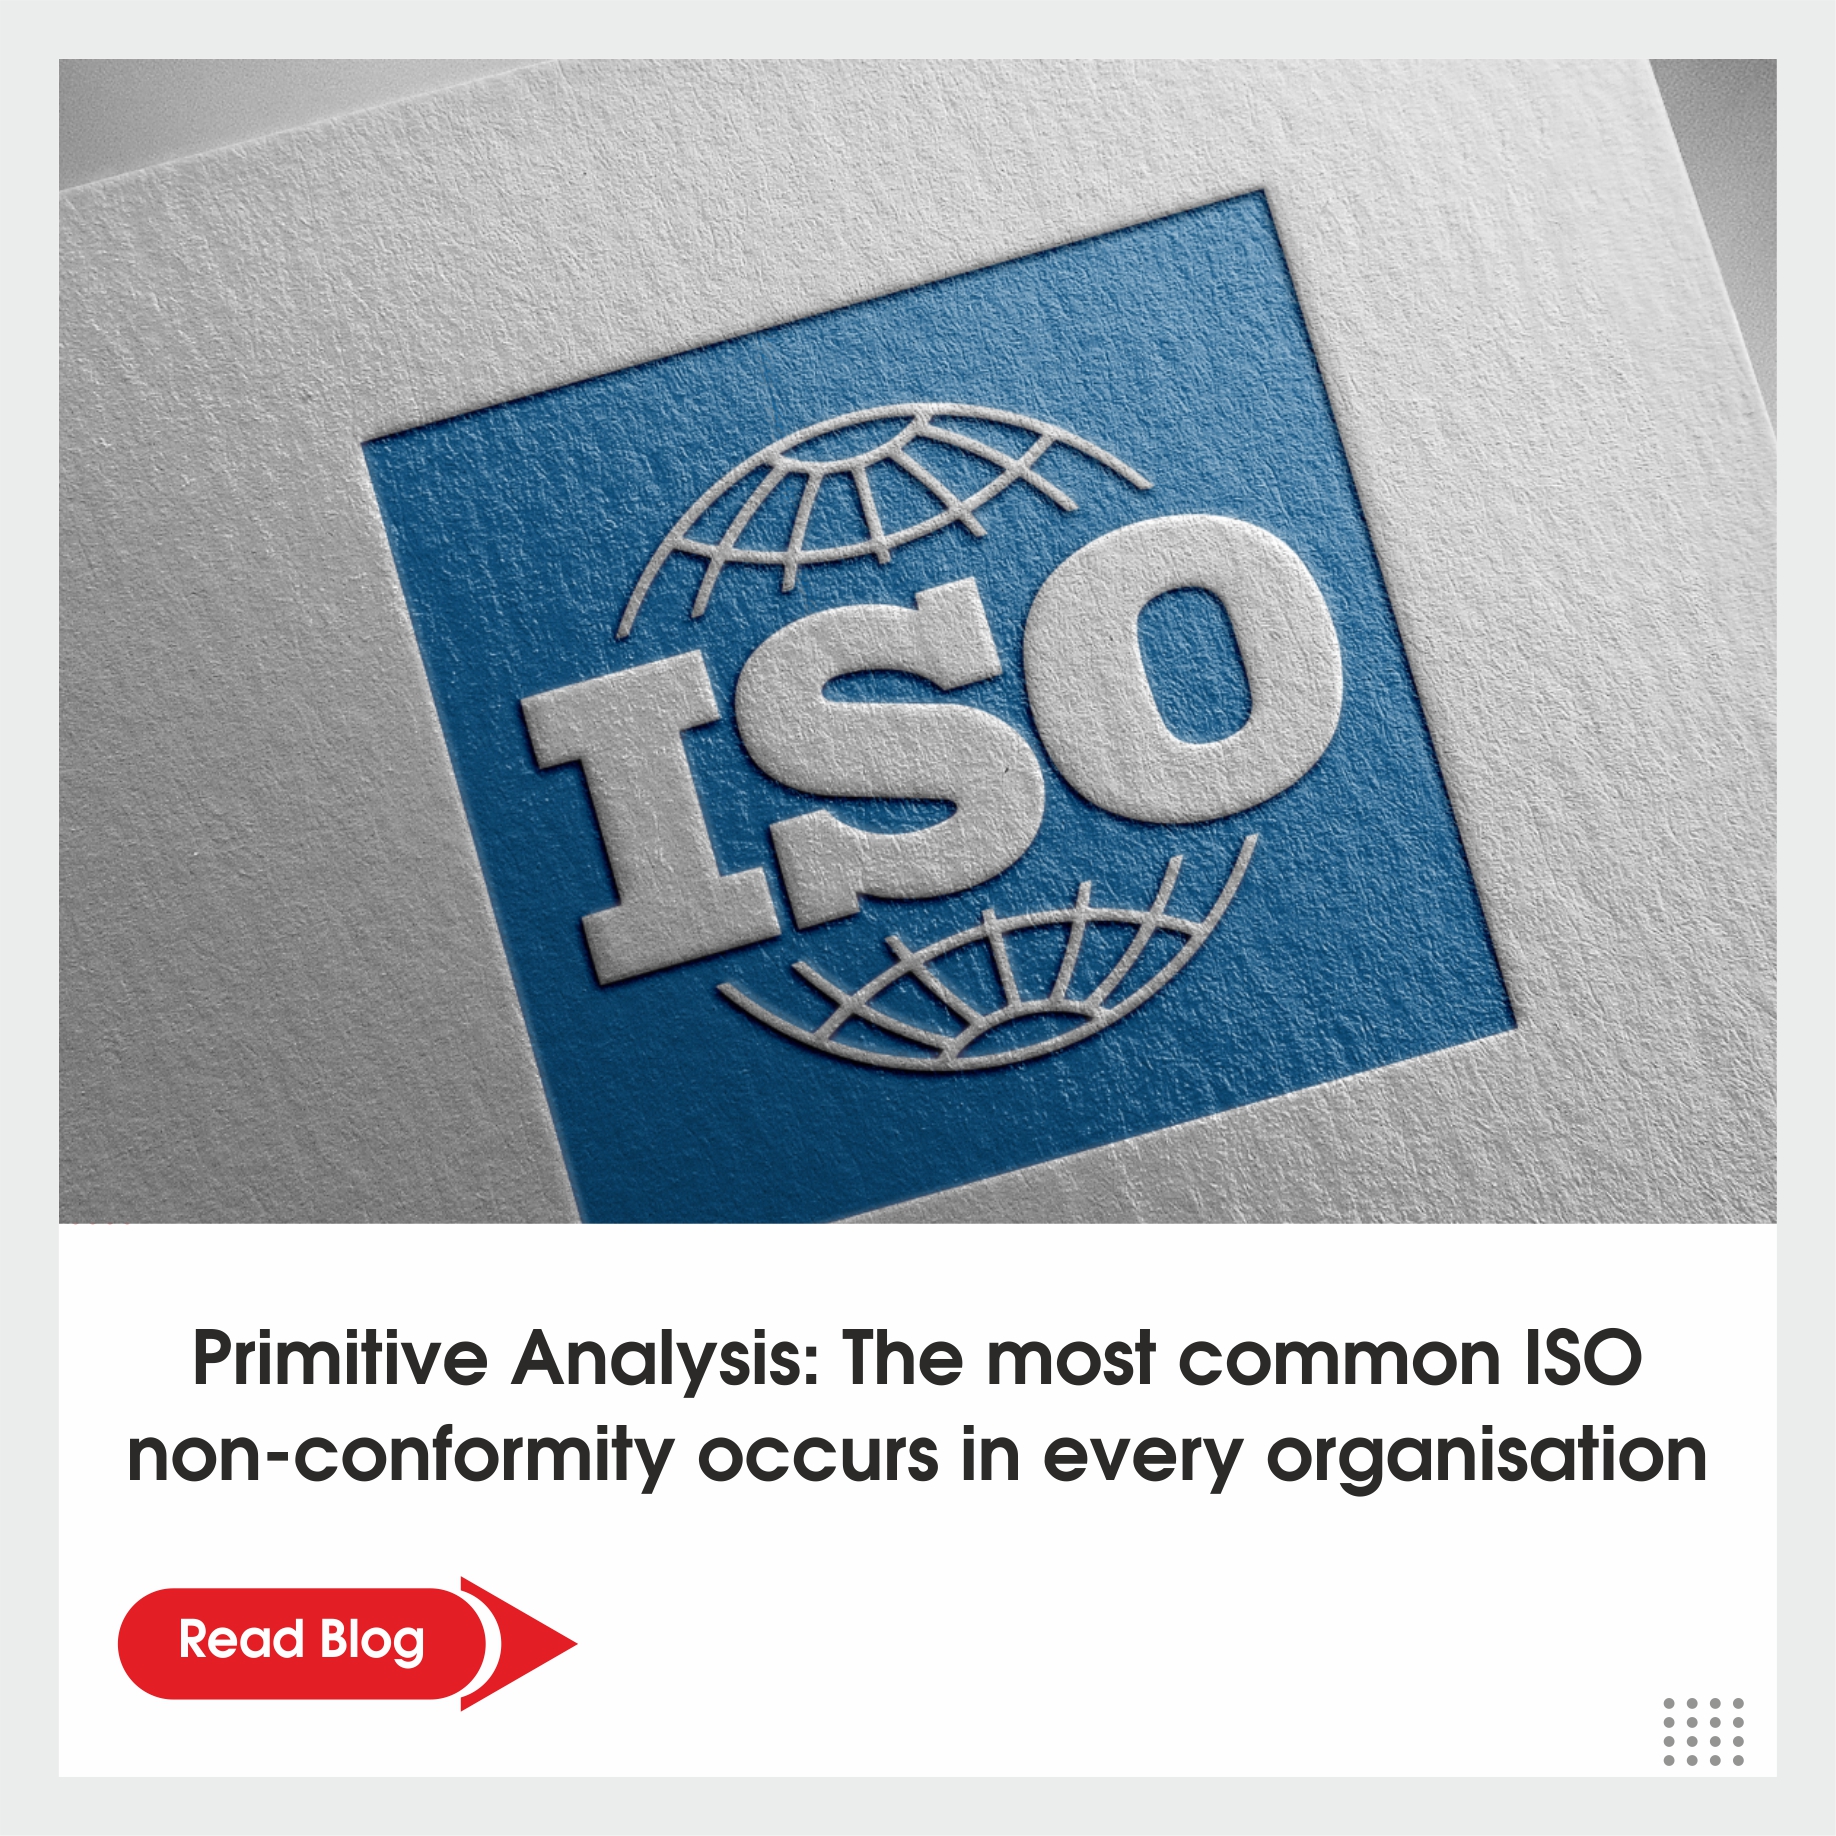 Primitive-Analysis-The-most-common-ISO-non-conformity-occurs-in-every-organisation